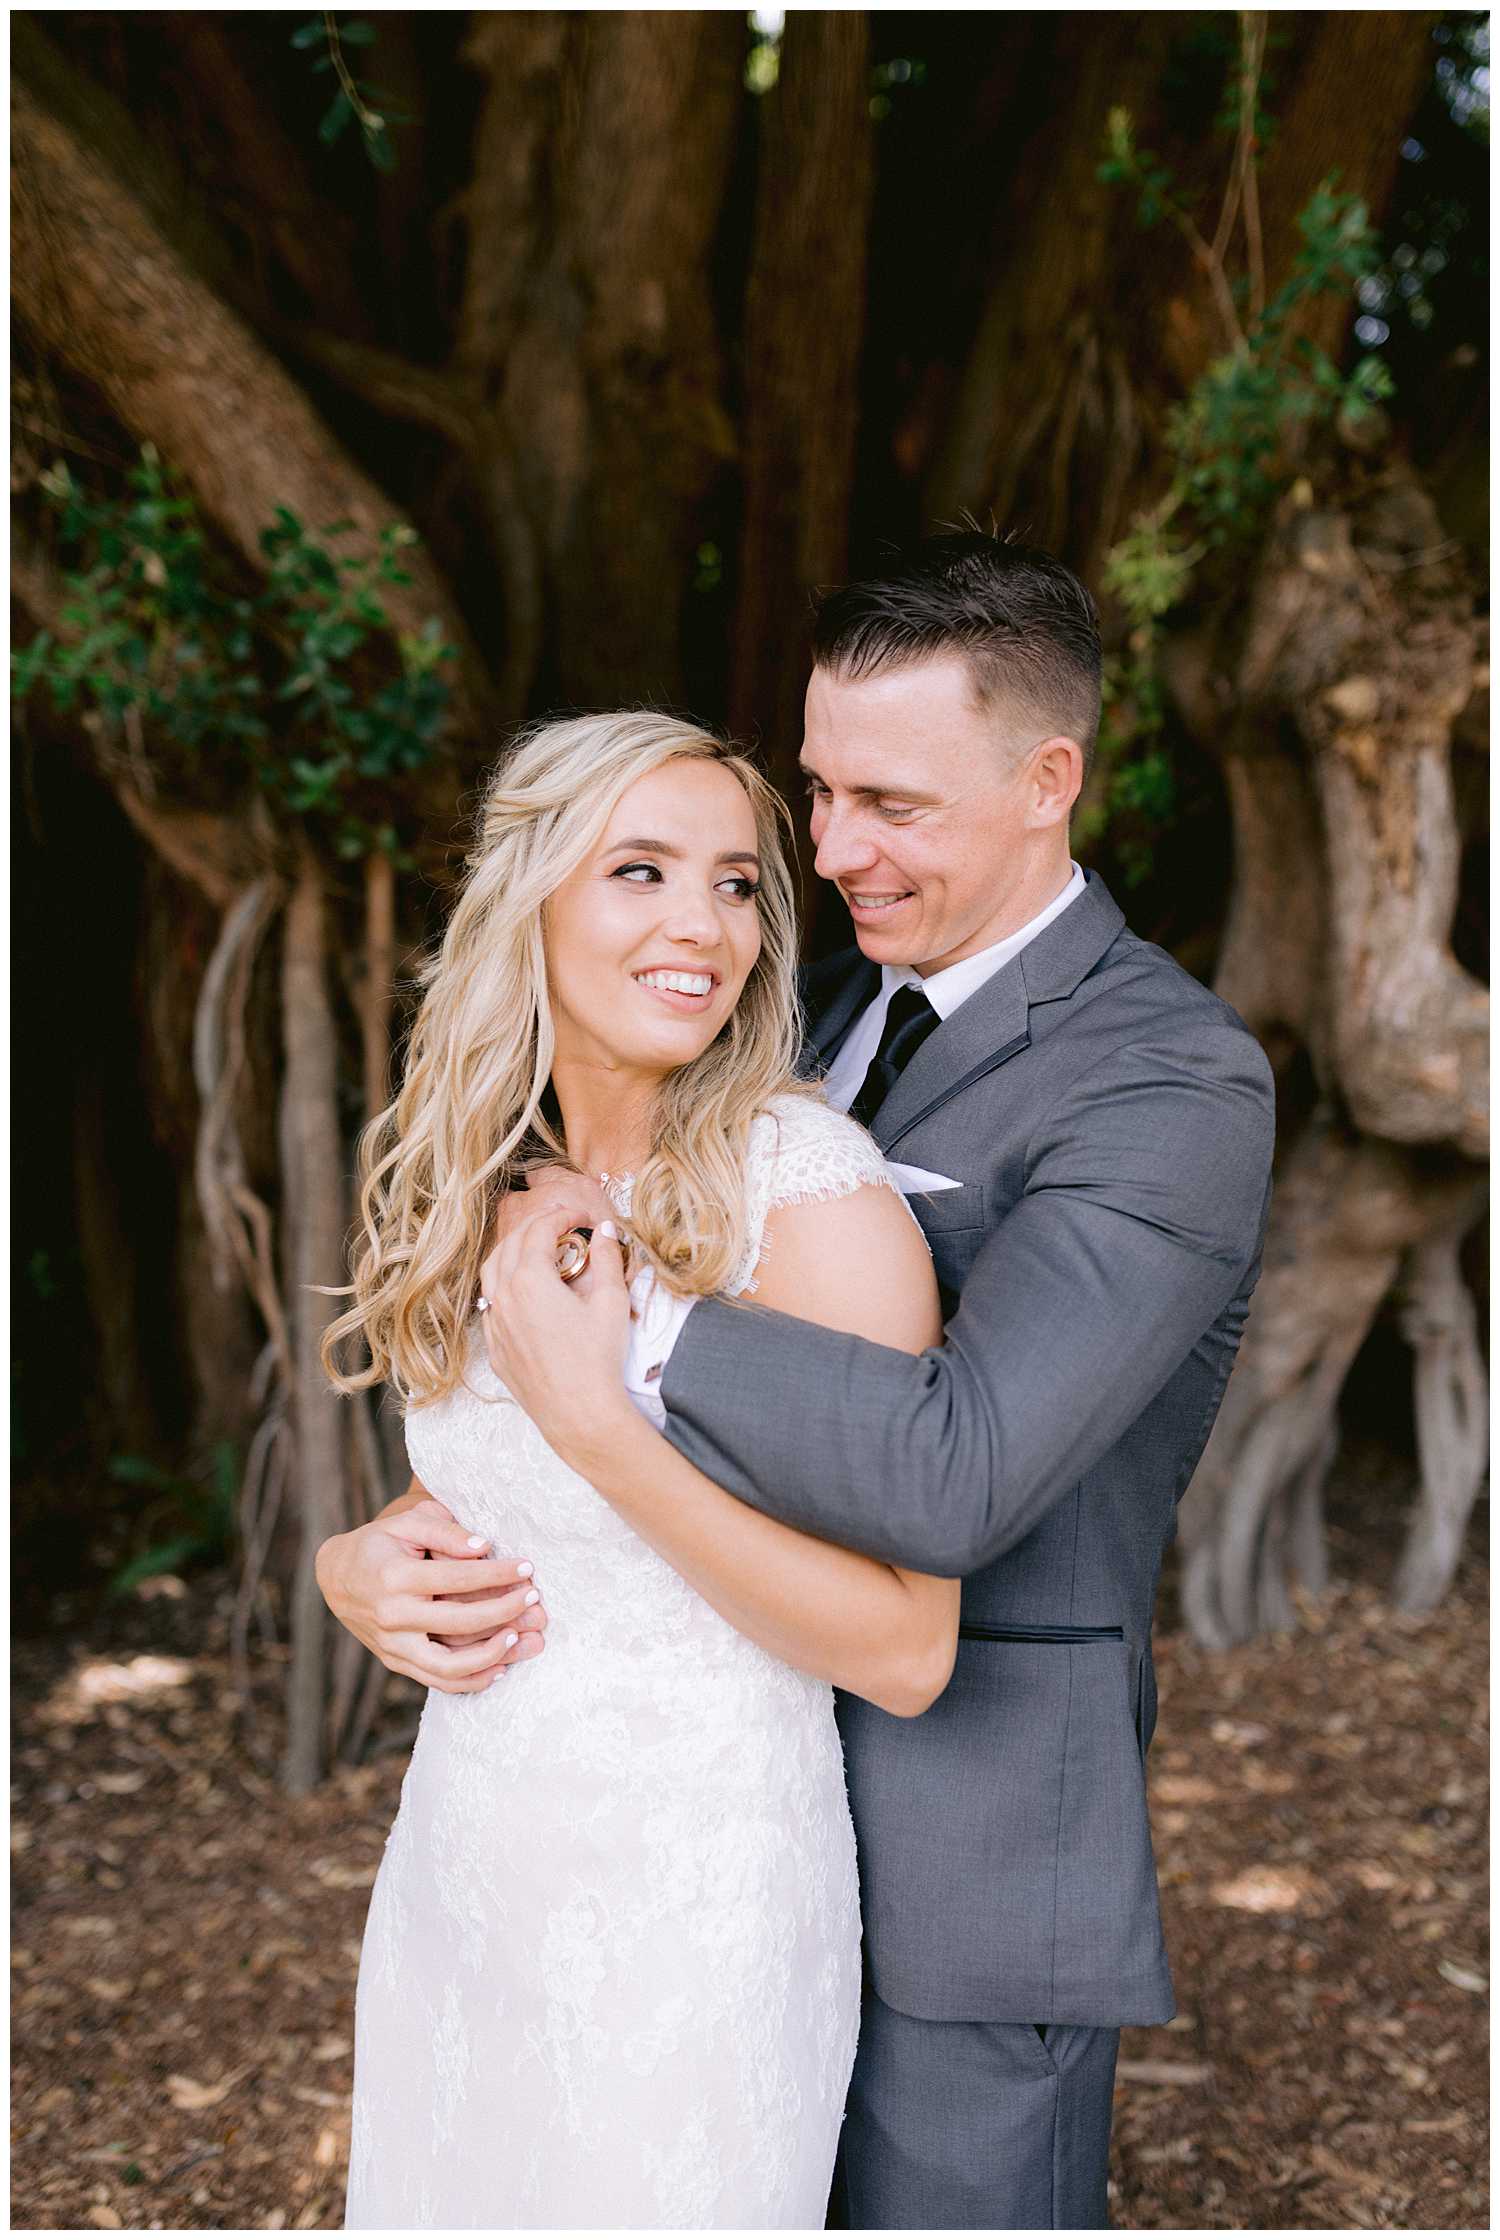 Kelsey and Mitchell embrace at their botanical garden elopement